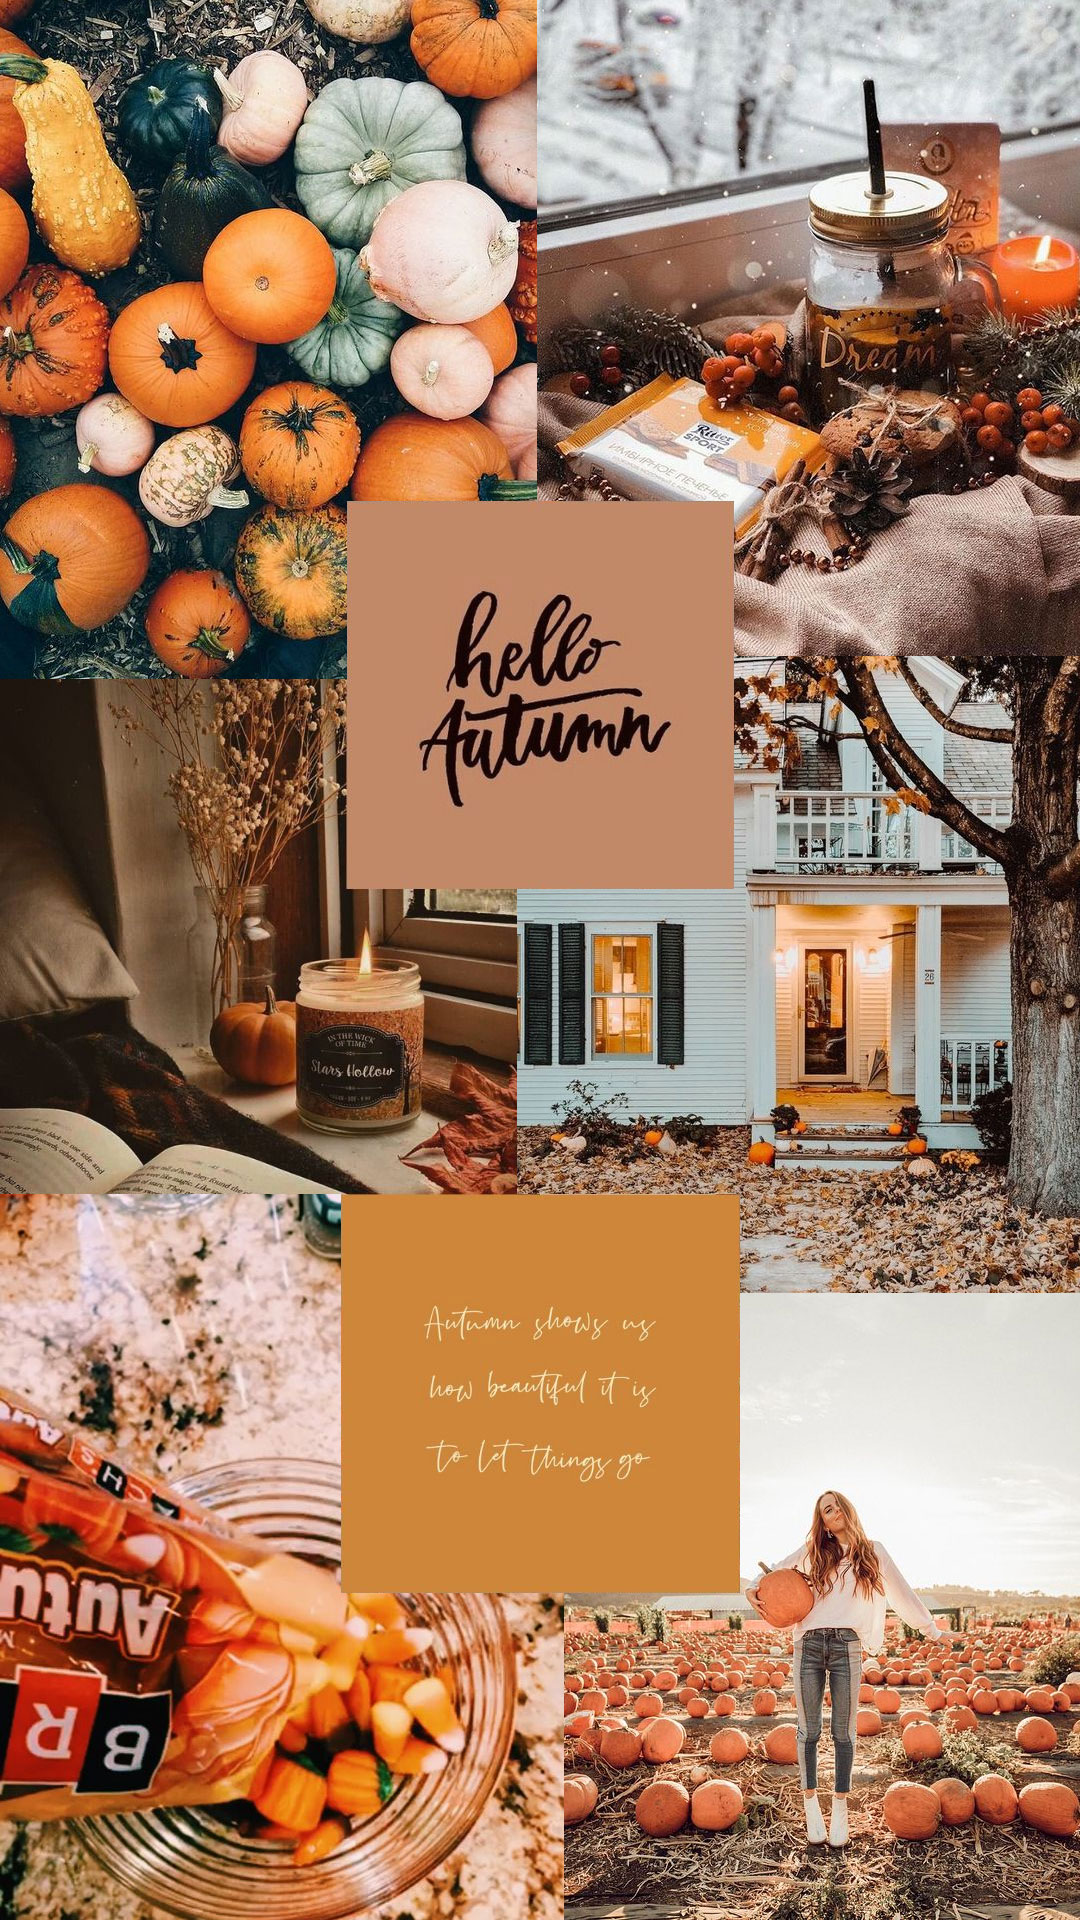 Autumn Collage Wallpaper, Pretty Fall Collage for Phone Wallpaper